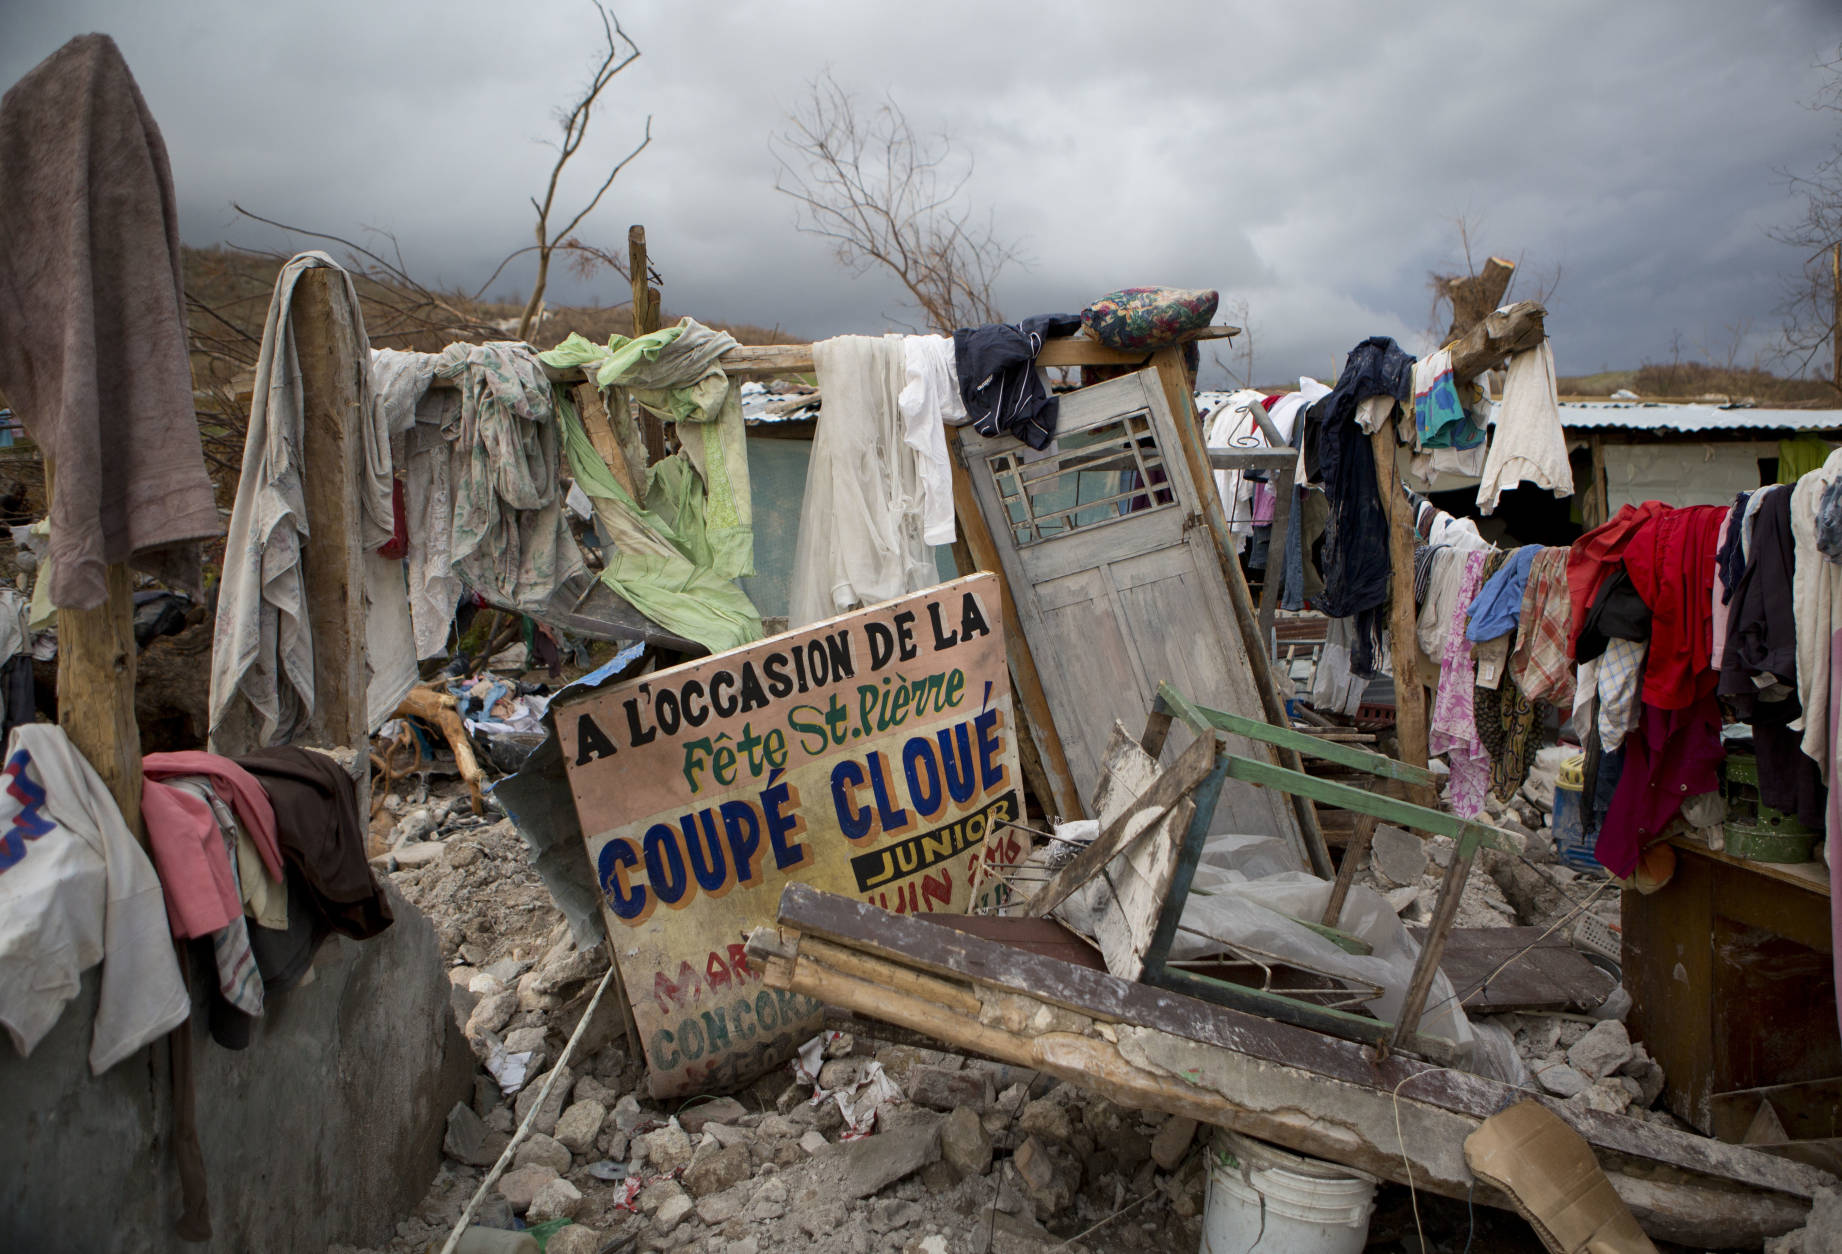 A sign in French announcing a music concert sits among salvaged clothes drying on the remains of a home destroyed by Hurricane Matthew in Port-a-Piment, Haiti, Monday, Oct. 10, 2016. Nearly a week after the storm smashed into southwestern Haiti, some communities along the southern coast have yet to receive any assistance, leaving residents who have lost their homes and virtually all of their belongings struggling to find shelter and potable water. (AP Photo/Rebecca Blackwell)